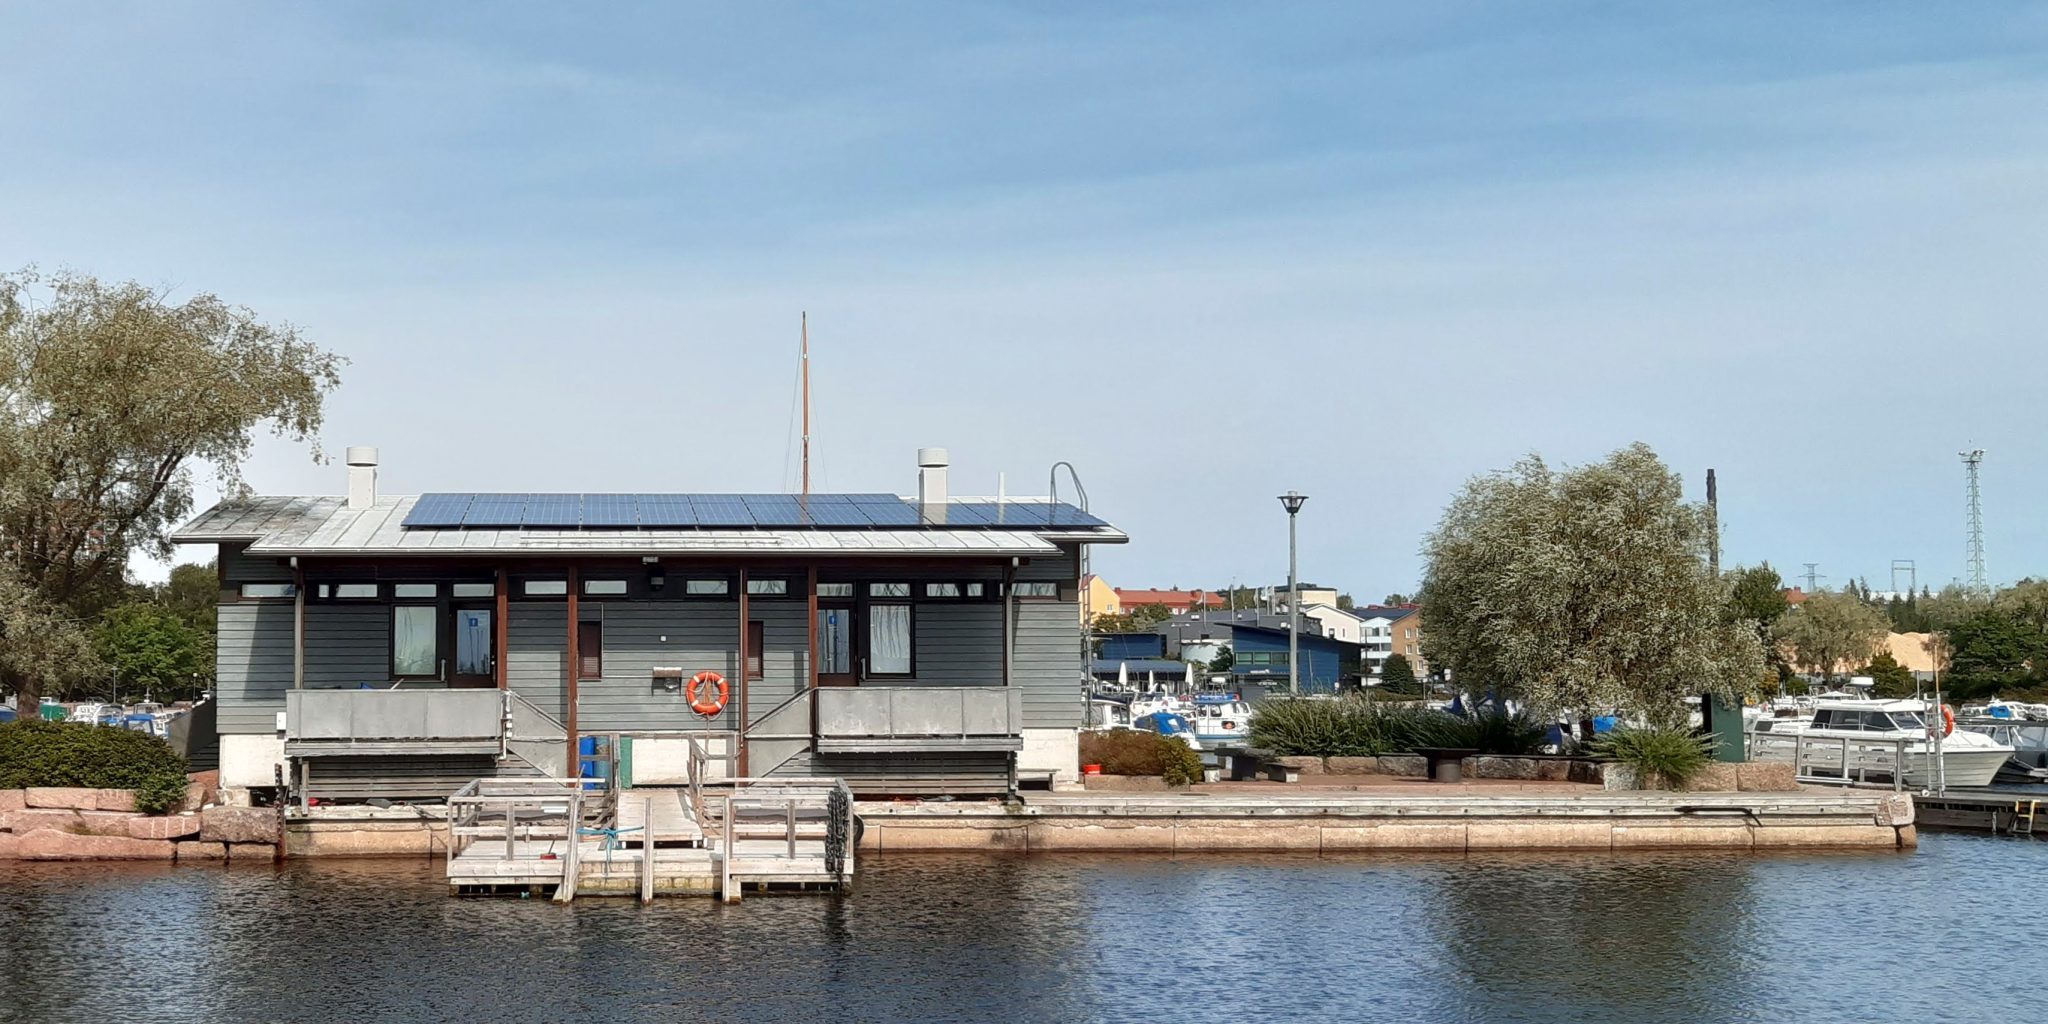 Solar system installed on the roof of a small port sauna in Kotka, Finland.